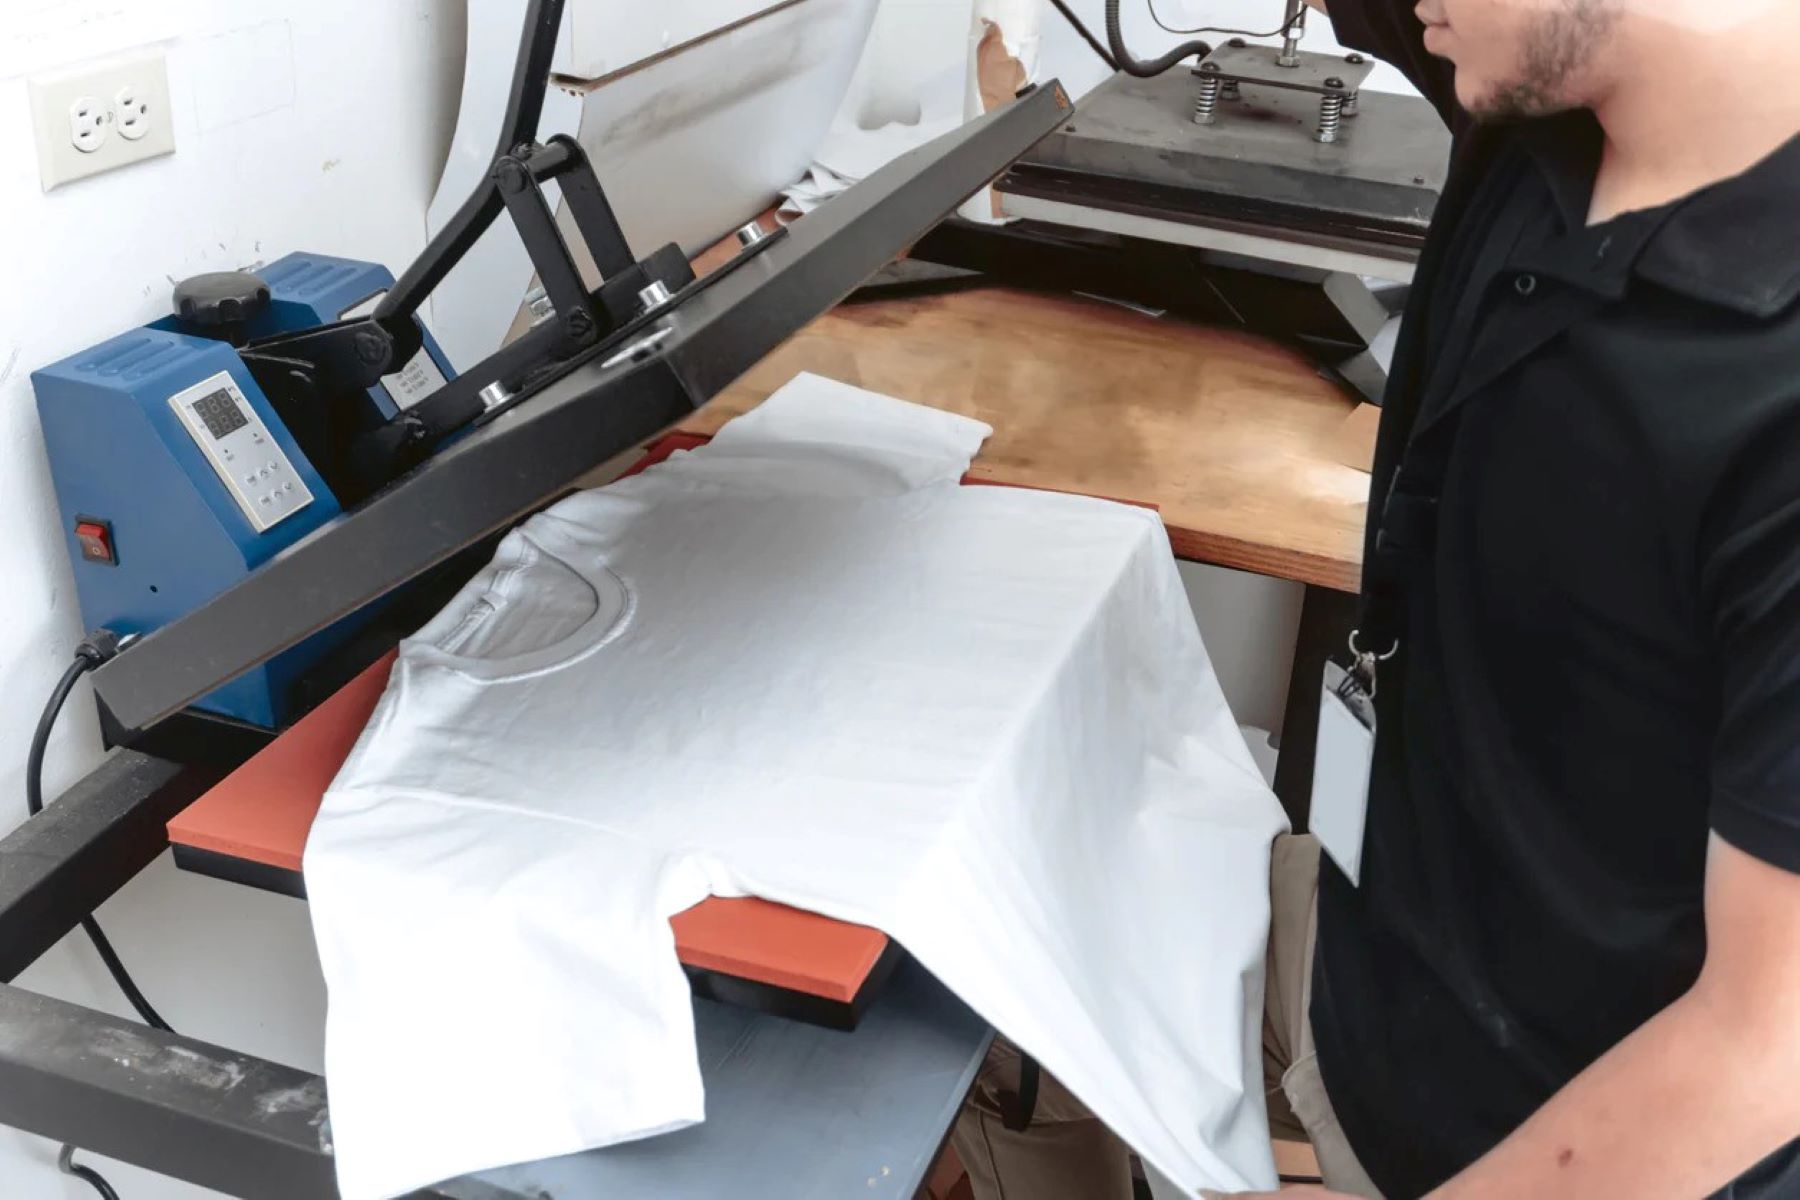 How To Use Sublimation Printer For Shirts